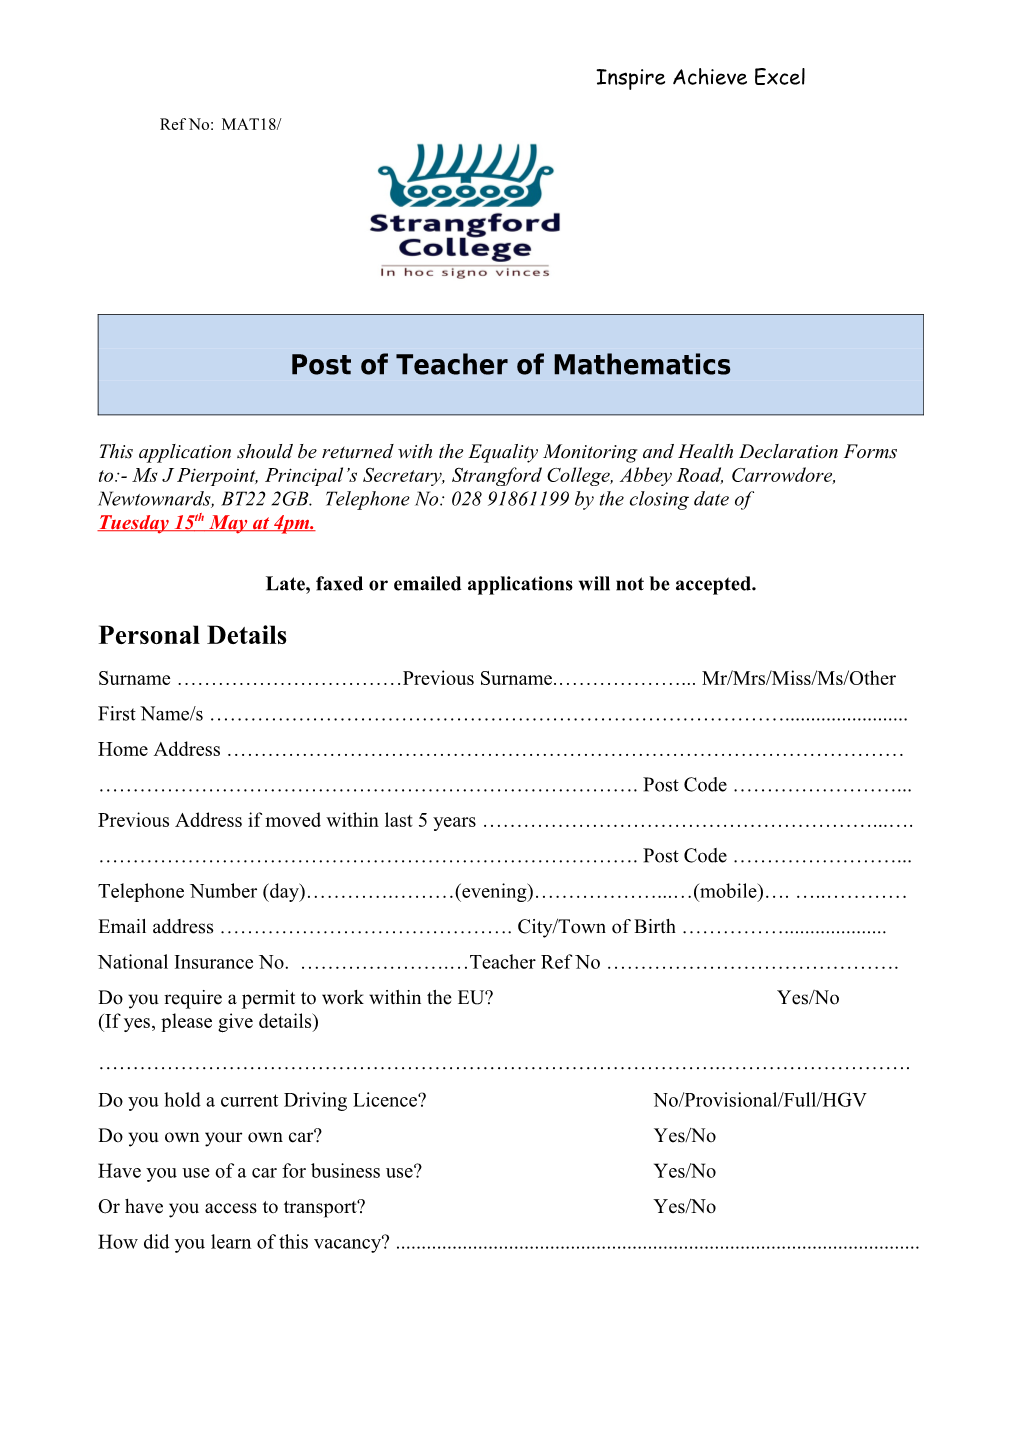 Late, Faxed Or Emailed Applications Will Not Be Accepted